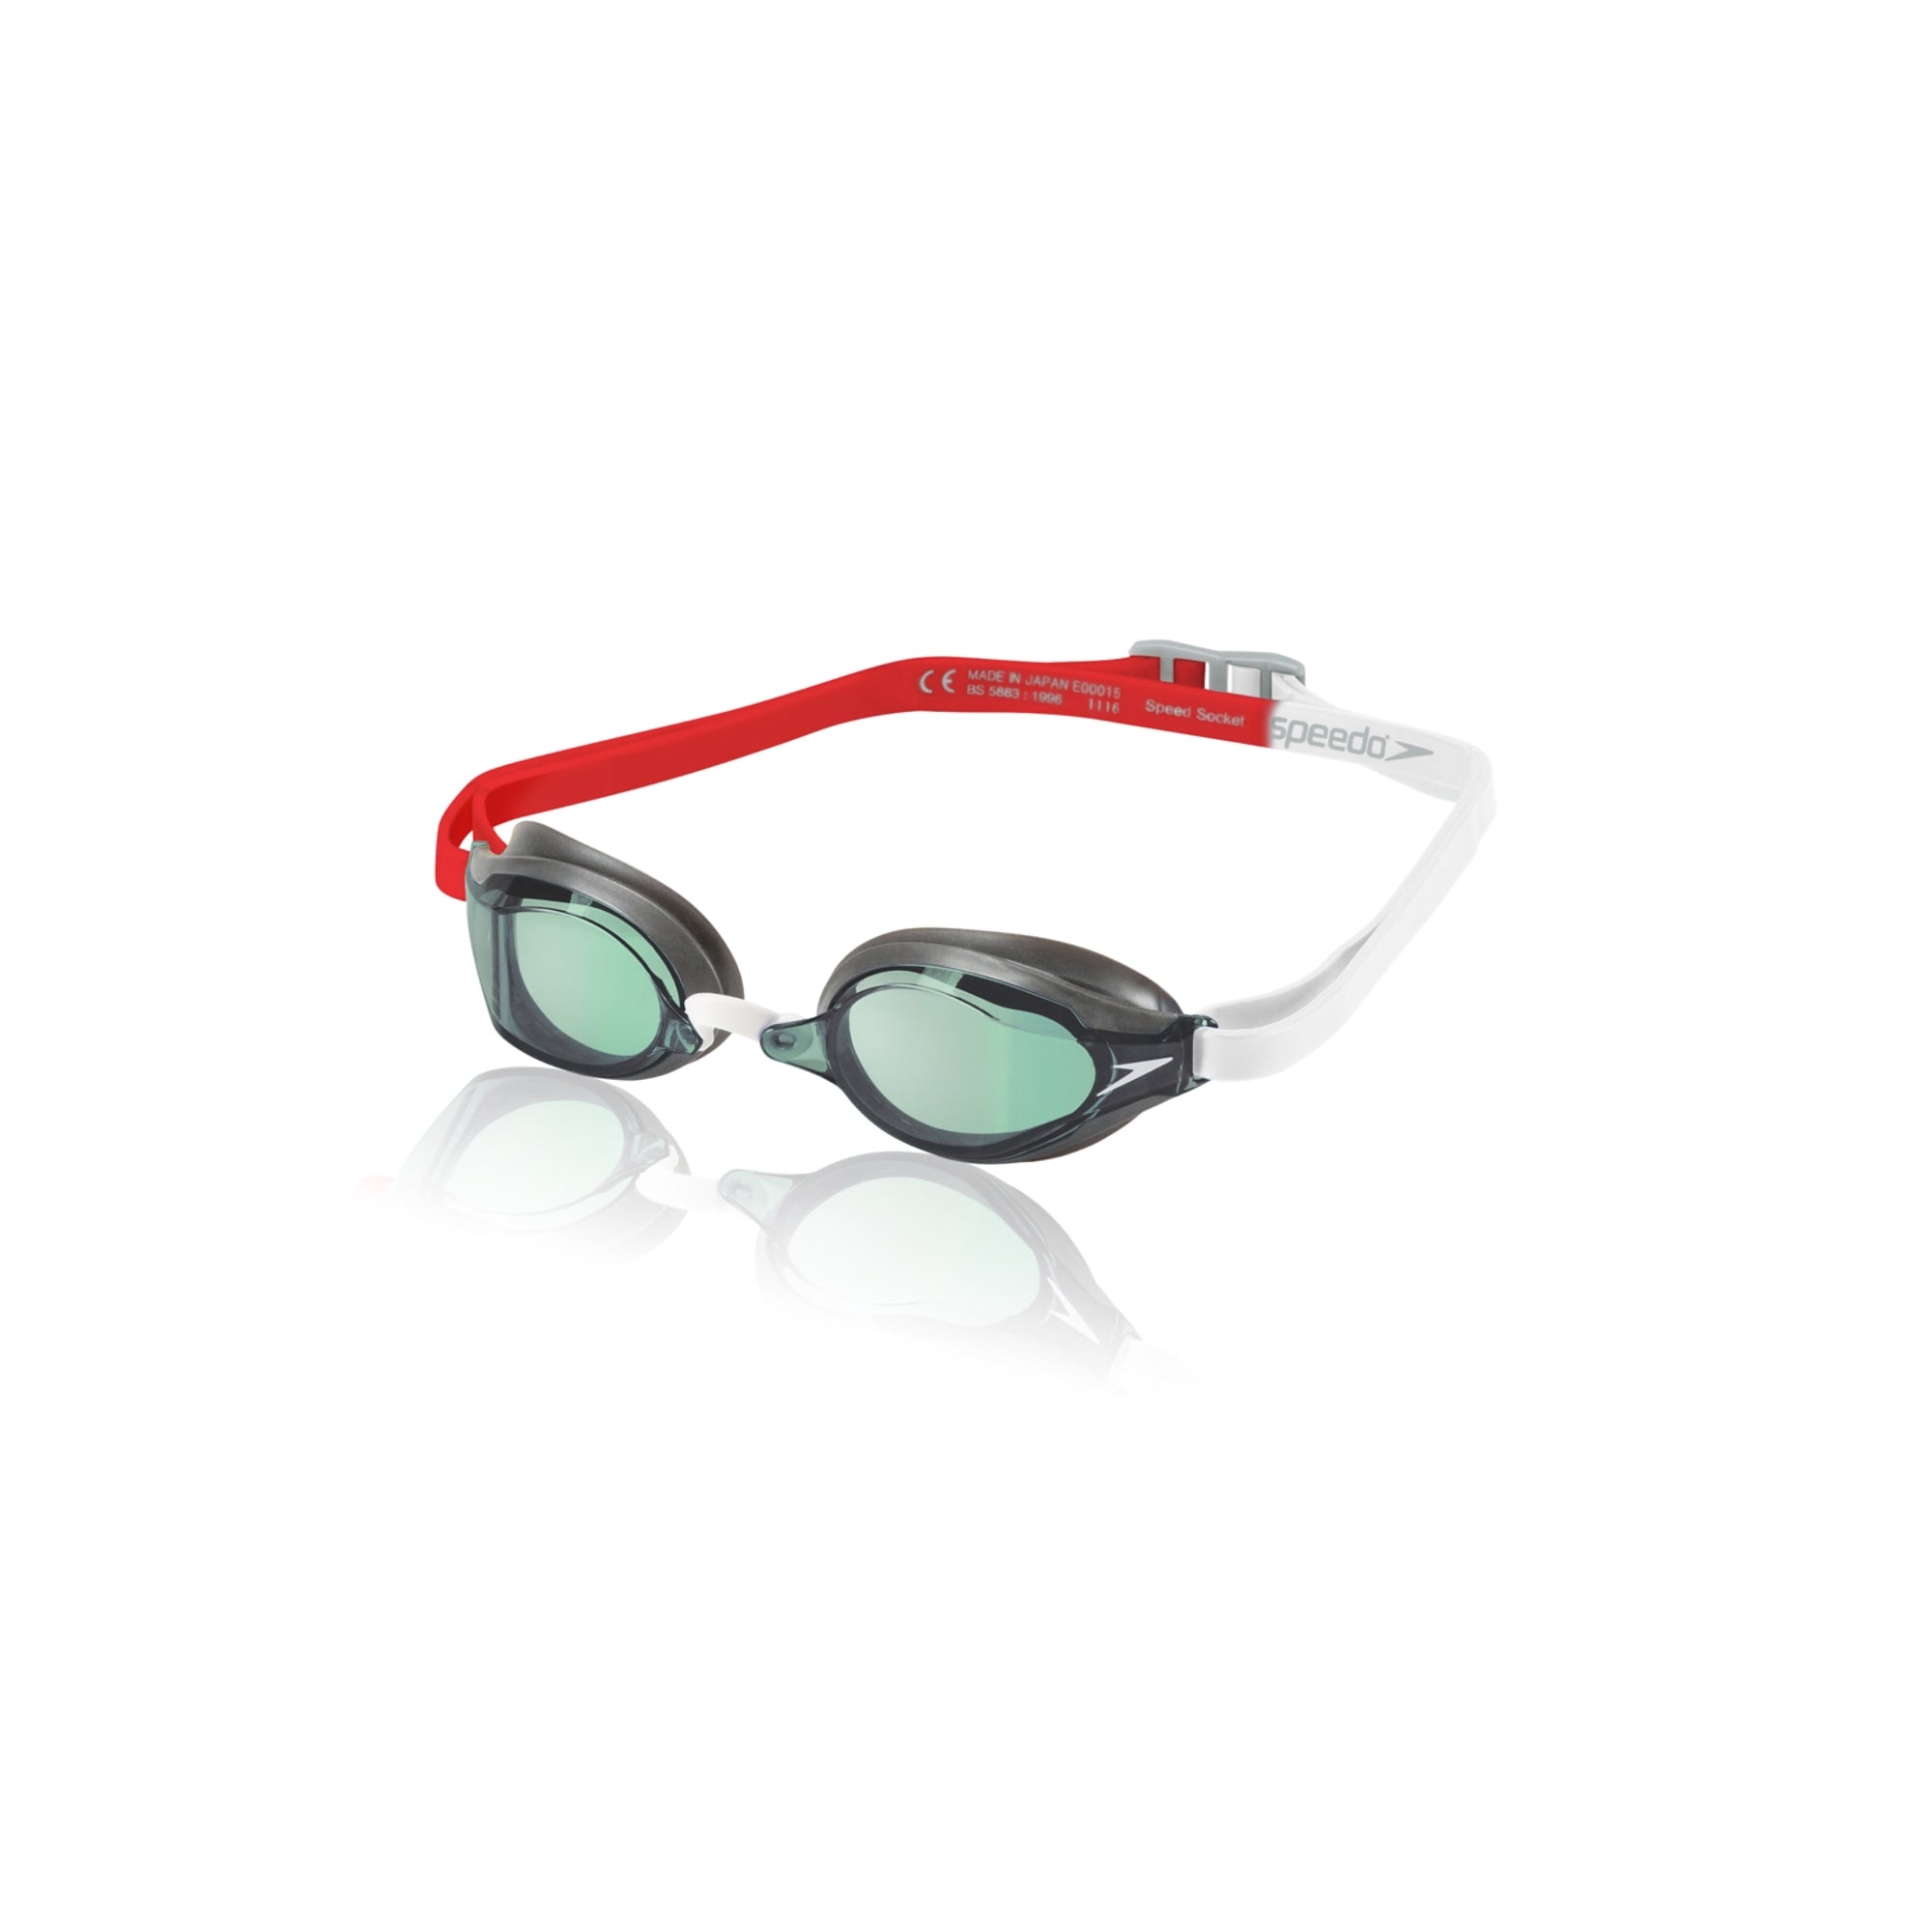 Speedo speed socket 2.0 mirrored goggles  Reach for this competition goggle on race day. It features a sleek low profile frame and wide panoramic lenses that resist fog for clear underwater vision. An innovative fit system and silicone headstrap ensure distraction free swimming so you can focus on winning.